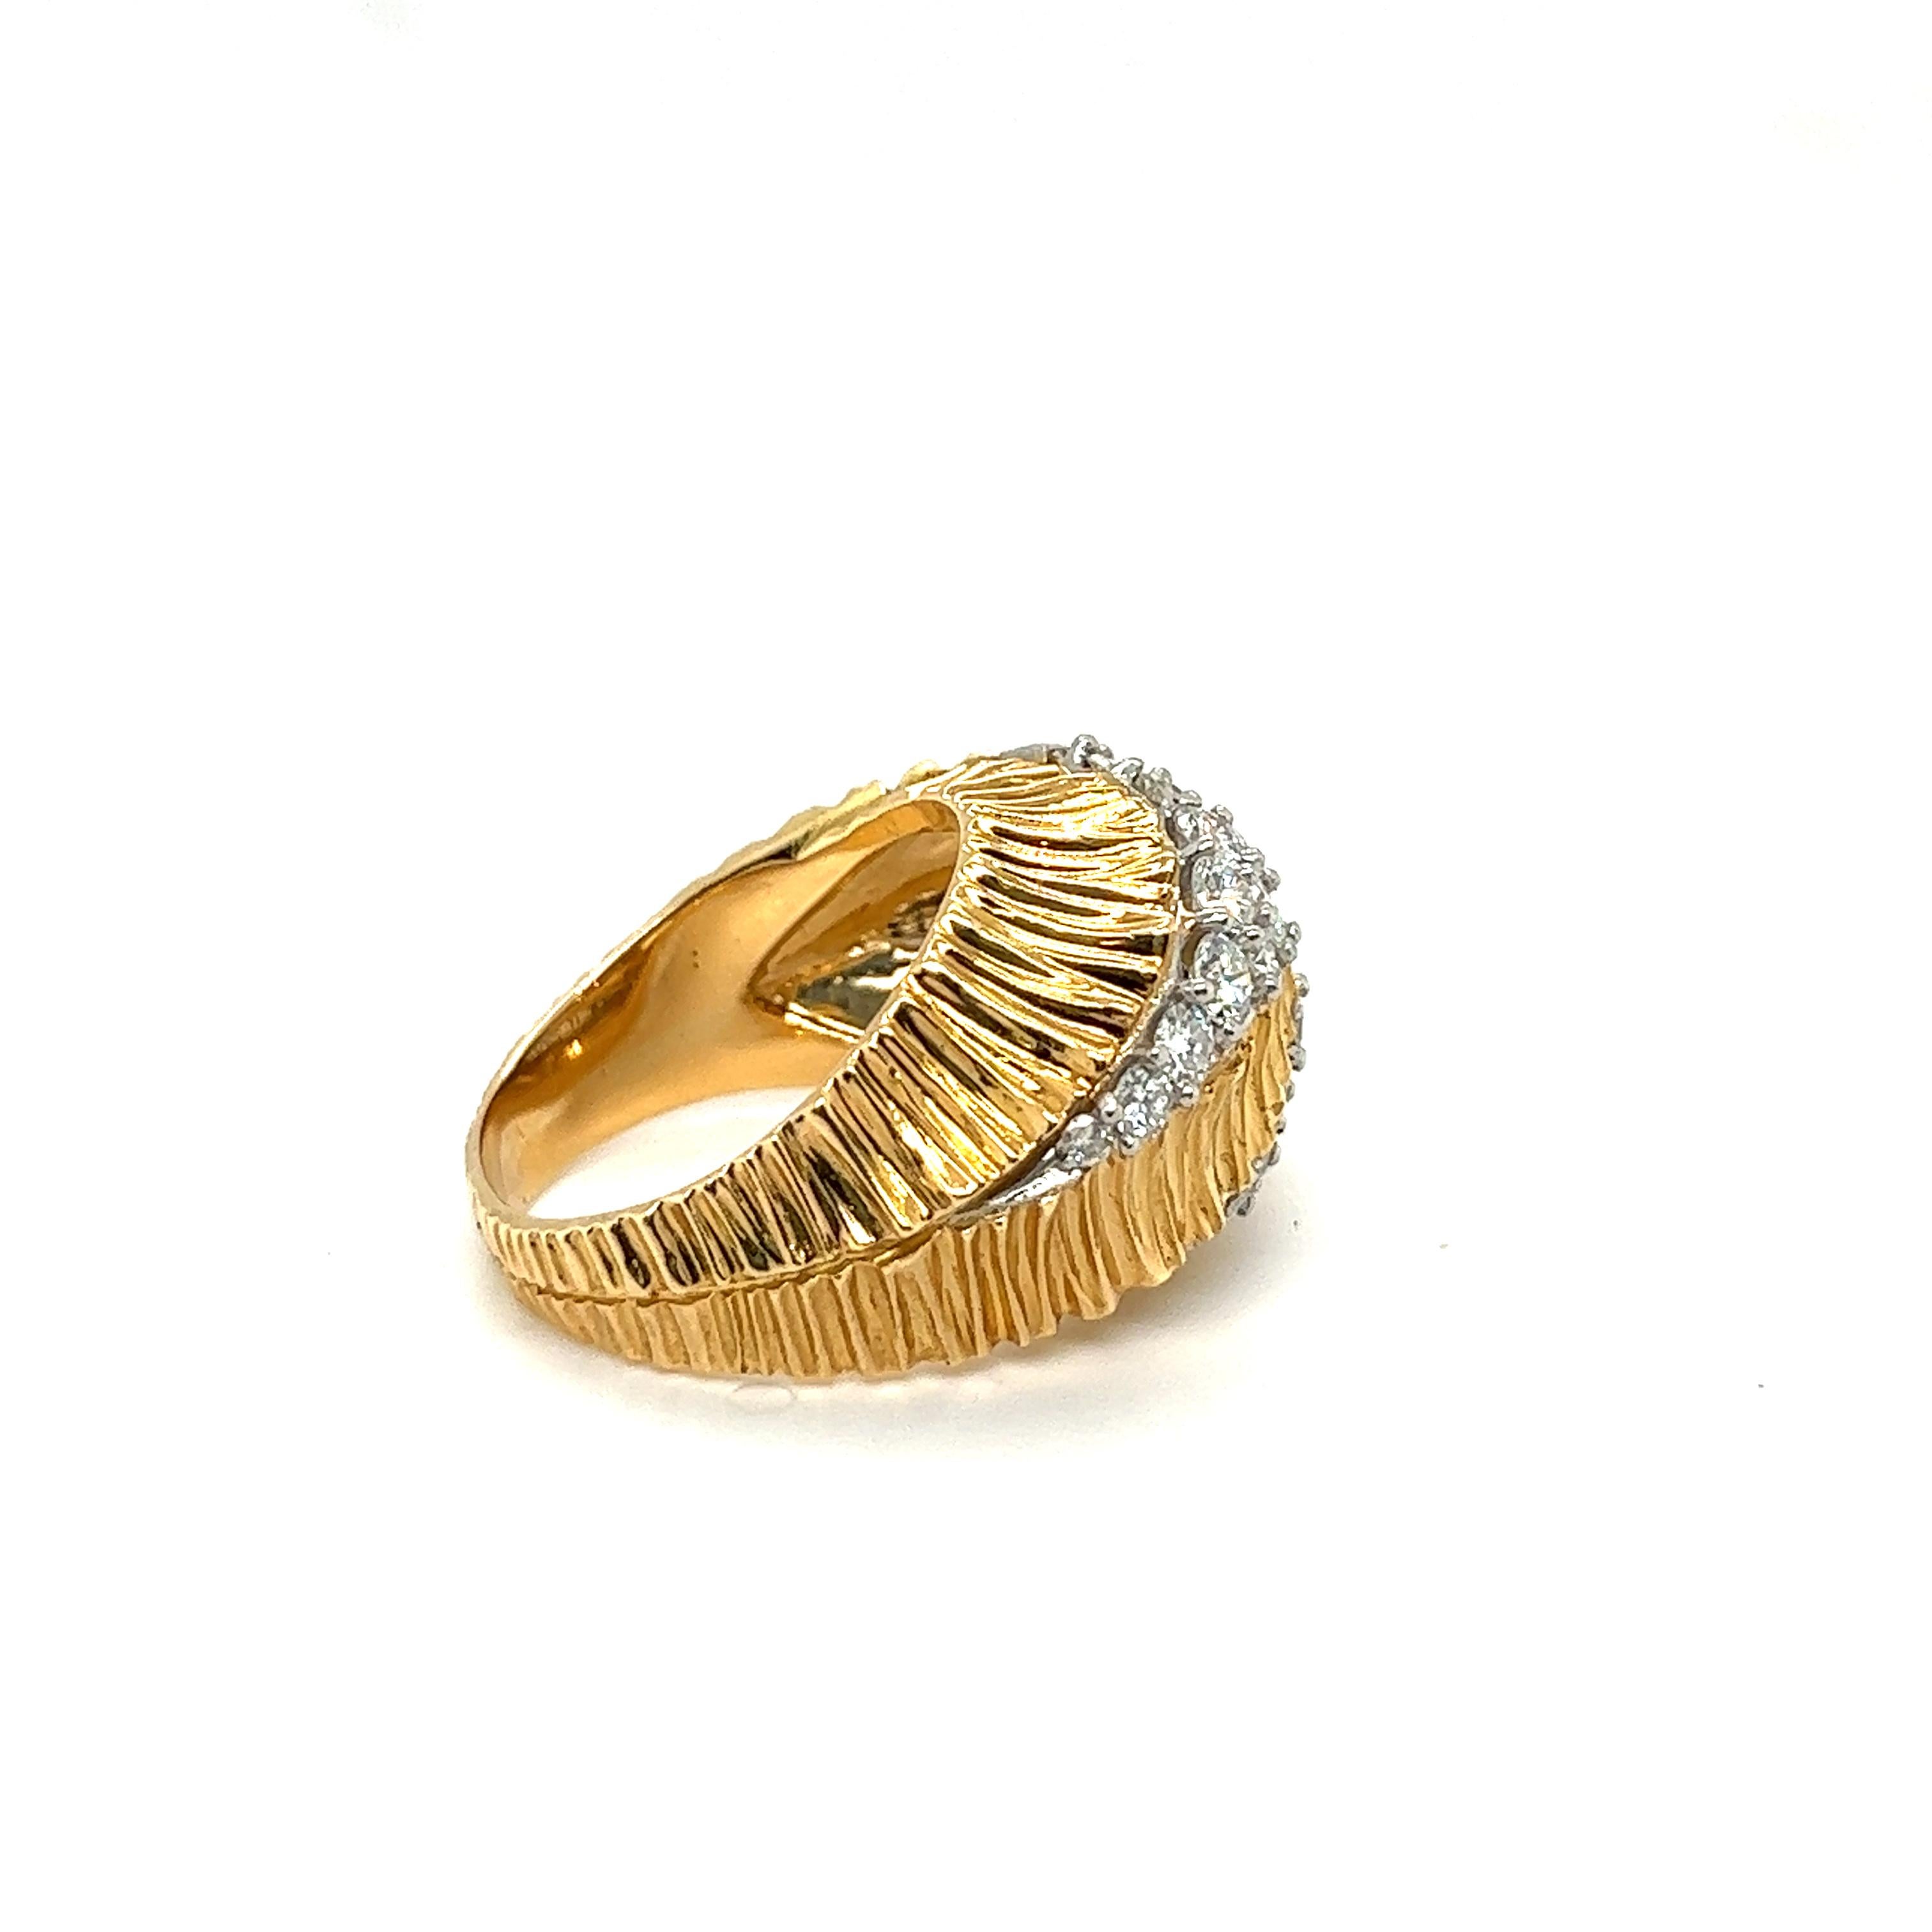 Brilliant Cut 18 Karat Yellow Gold and Diamond French Cocktail Ring, 1970s For Sale